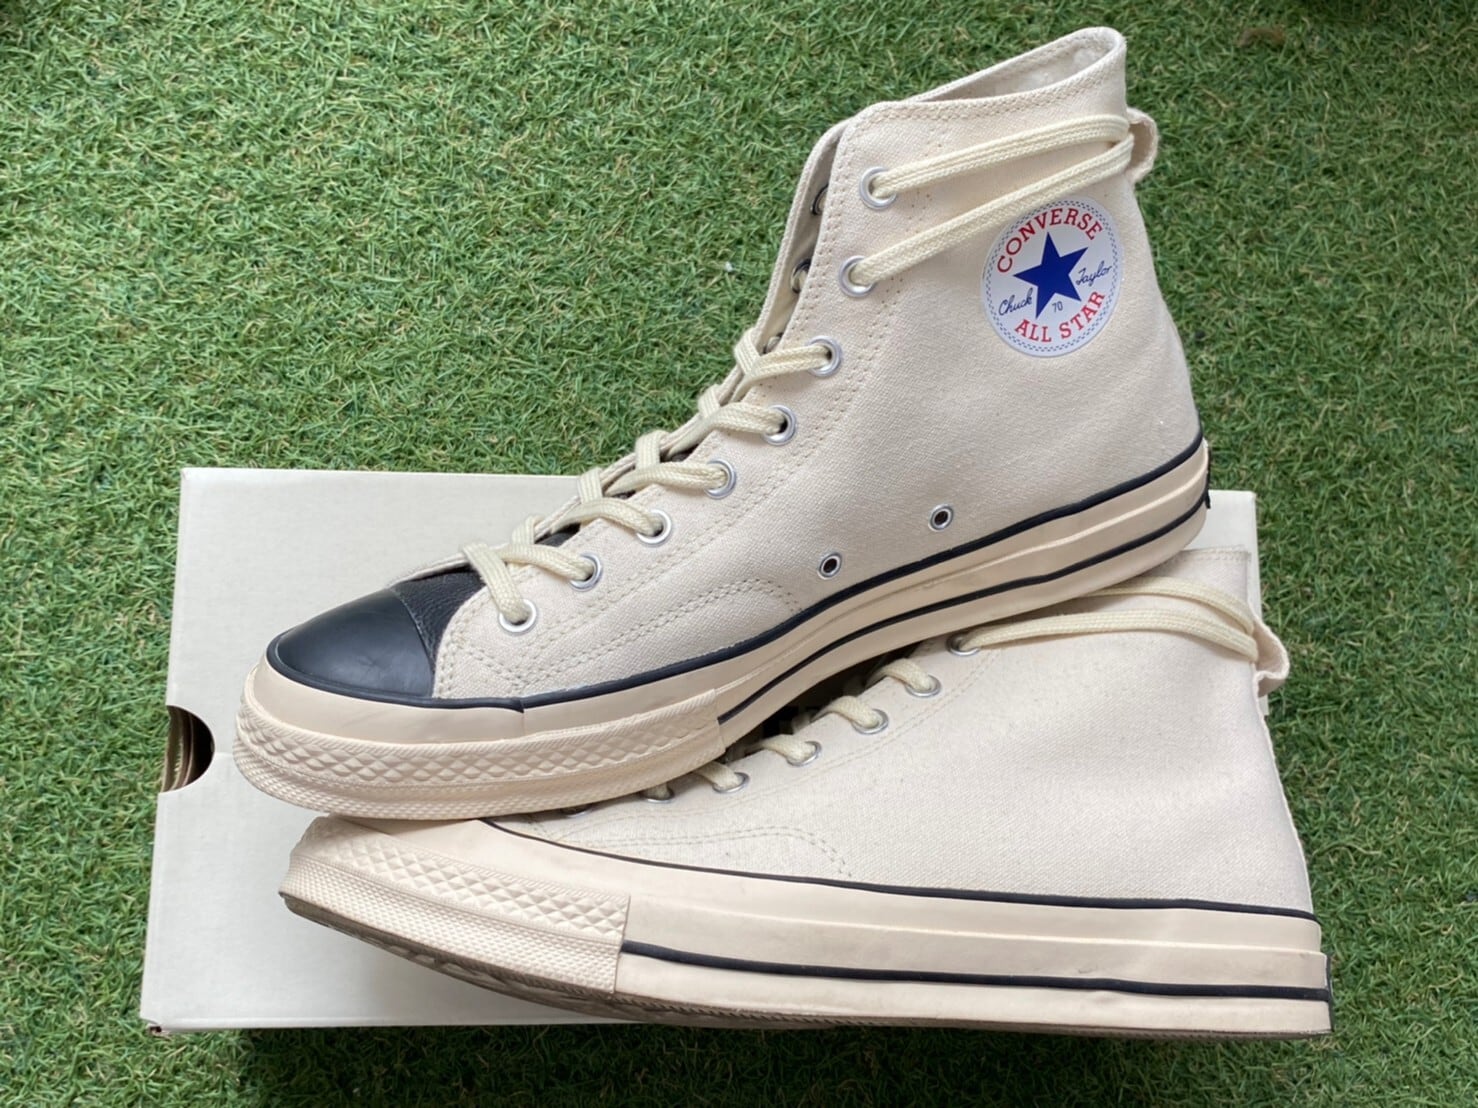 ESSENTIALS CONVERSE TAYLOR ALL STAR 70S HIGH NATURAL 164530C 29.5cm 178493 | BRAND BUYERS OSAKA